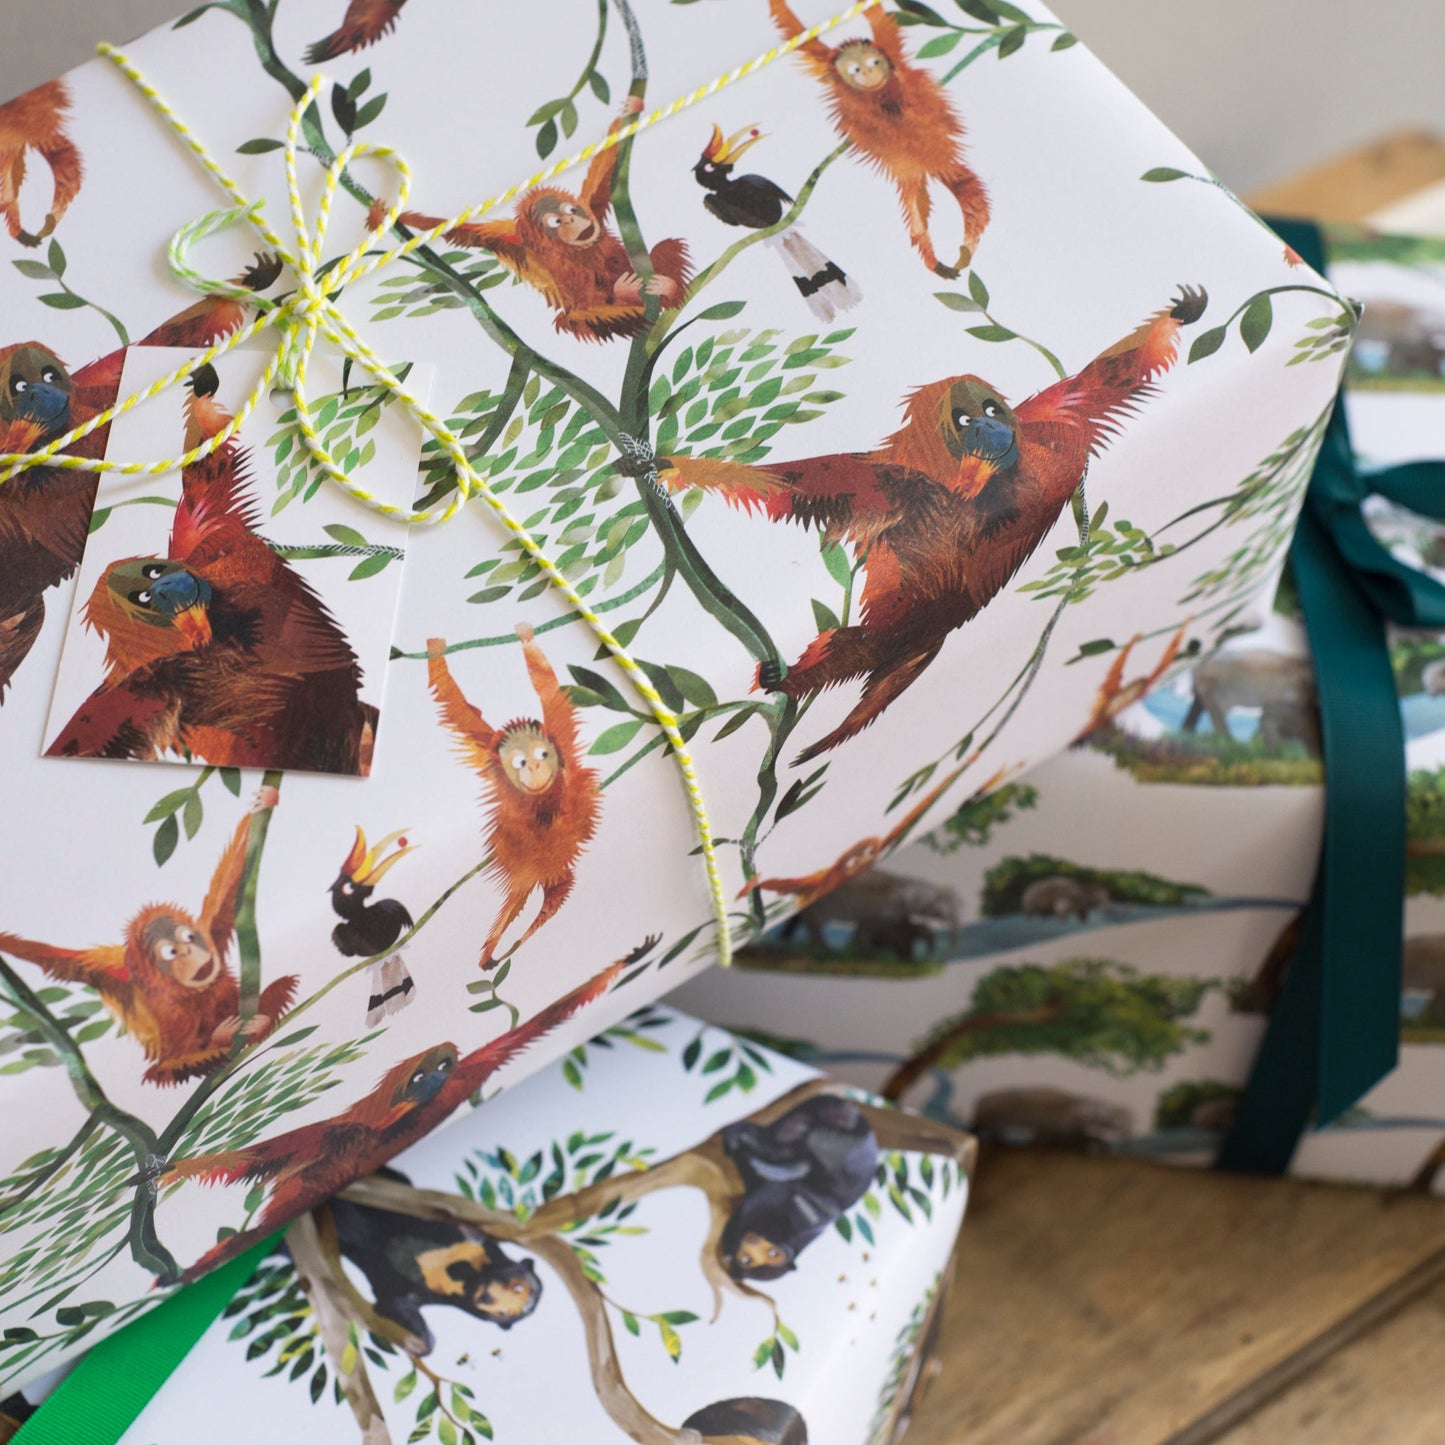 Swinging Orangutans Luxury, 100% Recycled Wrapping Paper